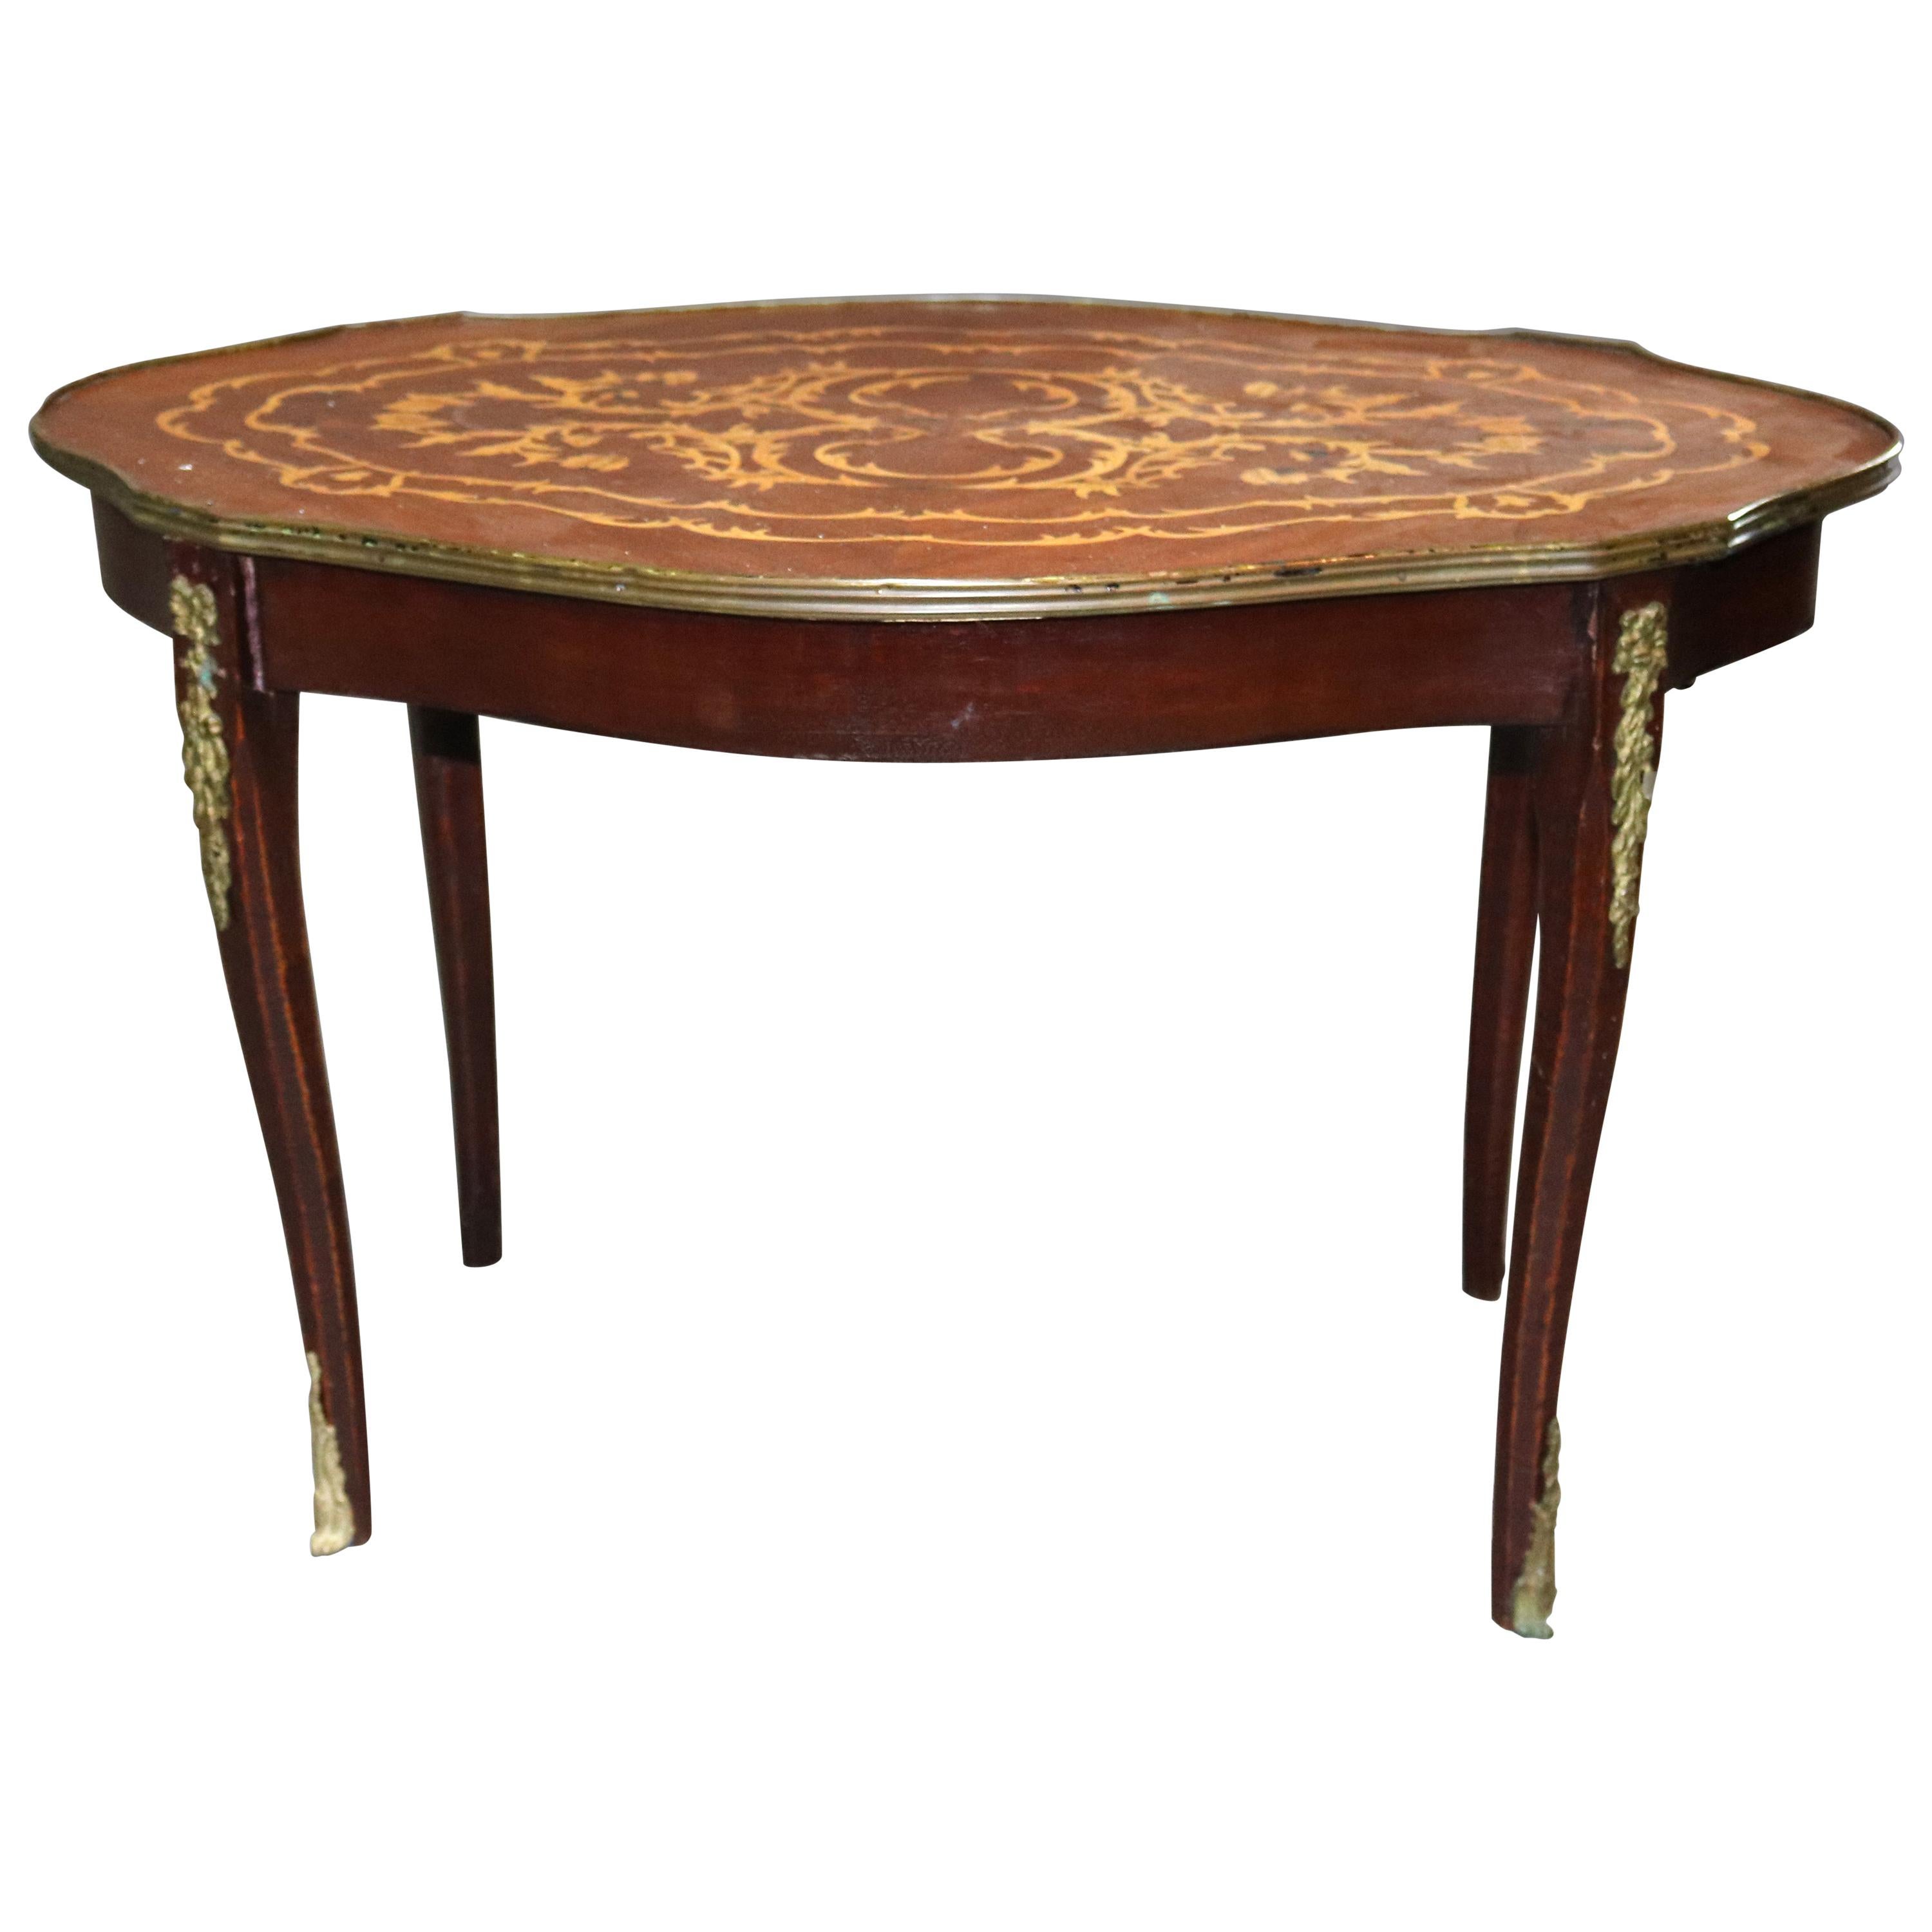 Vintage French Louis XVI Mahogany Marquetry Coffee Table, 20th Century